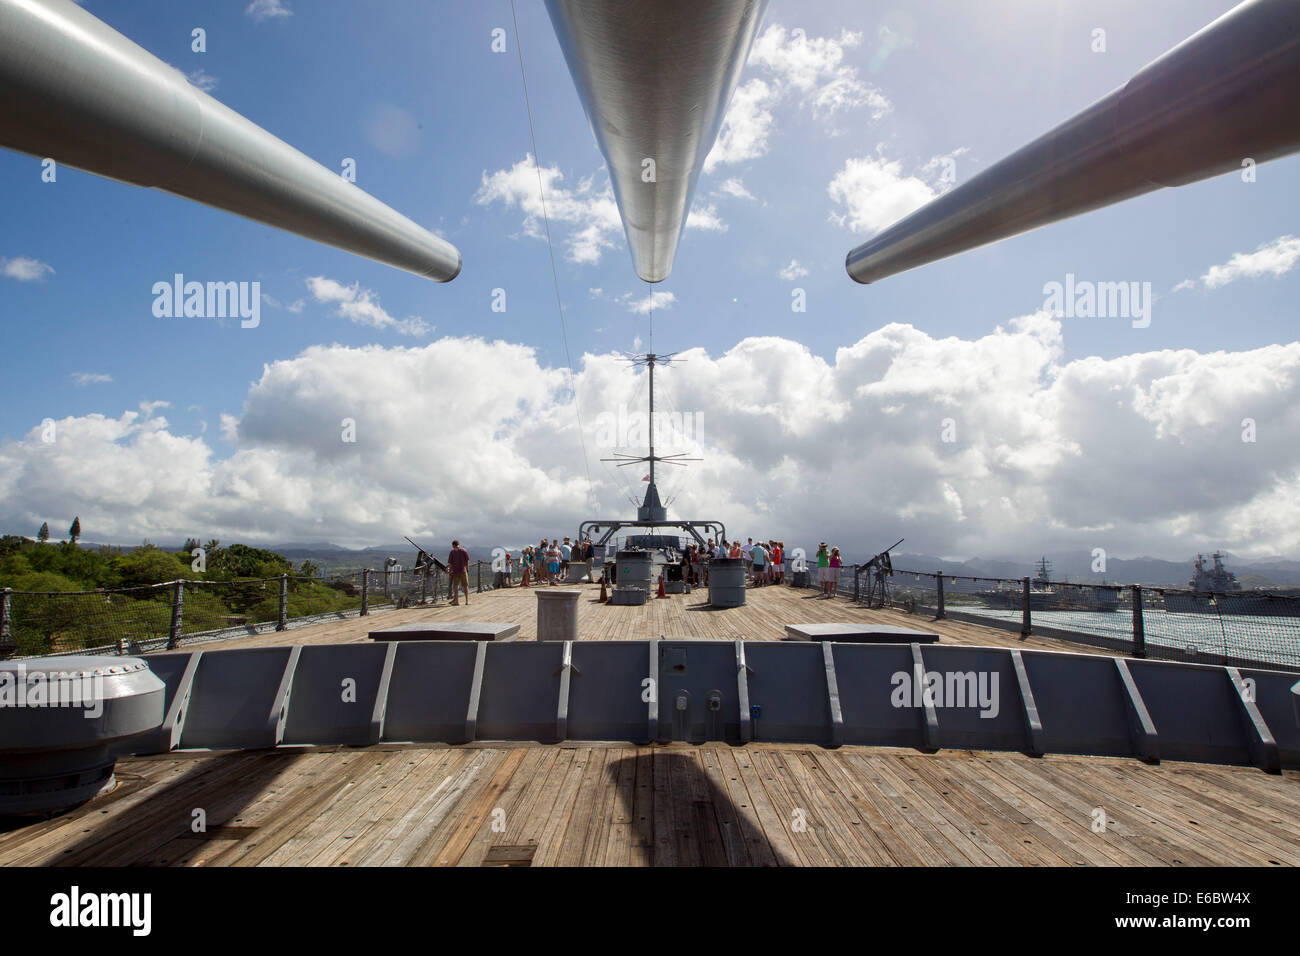 Uss Missouri, USA. 31st July, 2014. Tourists walk on the deck of the USS Missouri battleship in Pearl Harbor, Hawaii, the United States, July 31, 2014. Japan and the U.S. signed surrender documents to end World War II on the USS Missouri battleship in 1945. Since 1998, the USS Missouri battleship has been opened to public as a memorial anchored in Pearl Harbor, Hawaii. © Eugene Tanner/Xinhua/Alamy Live News Stock Photo